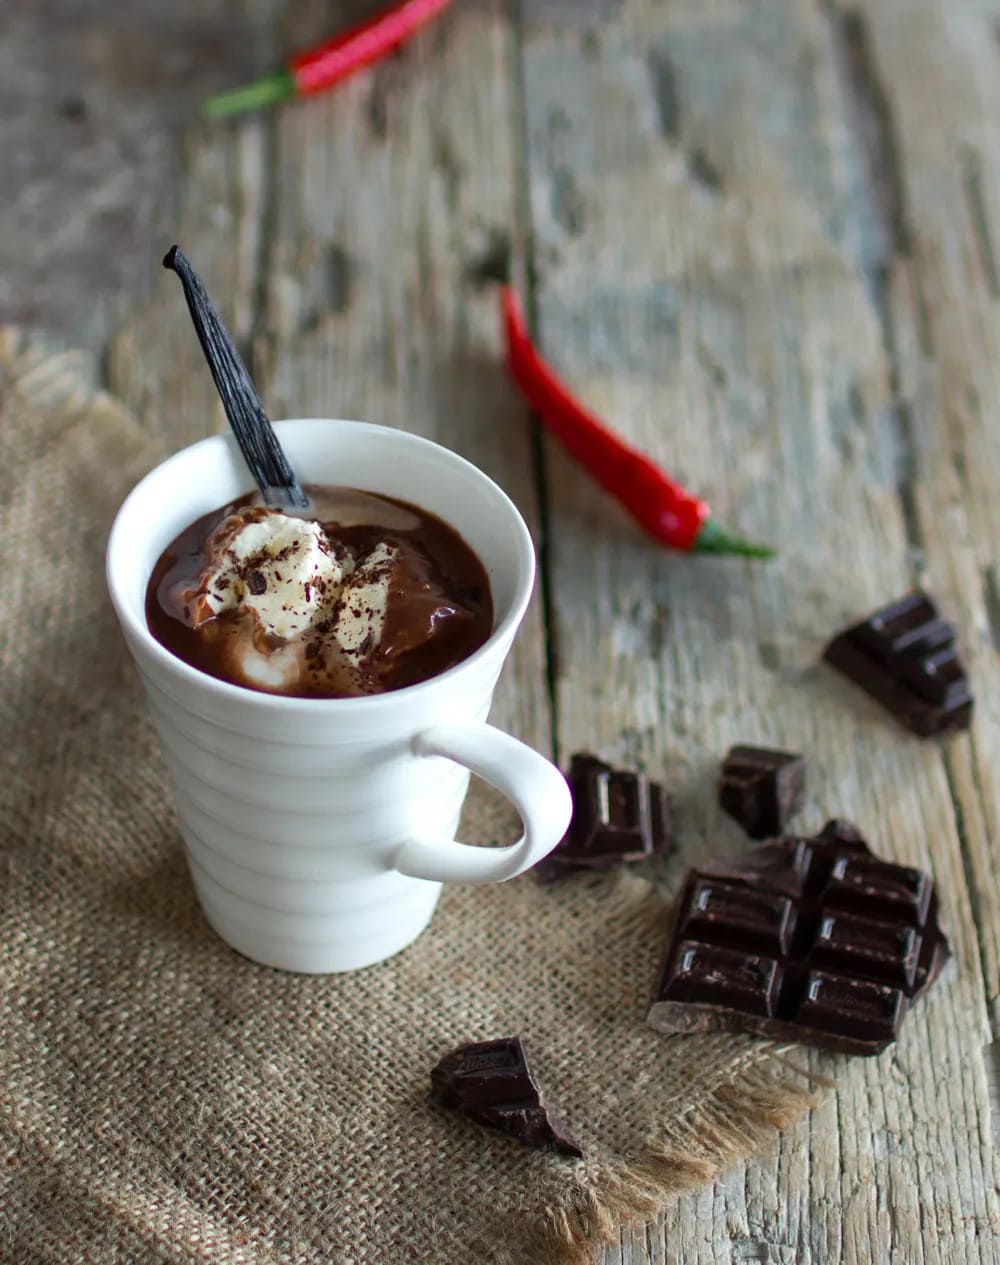 SPICED HOT CHOCOLATE WITH RUM